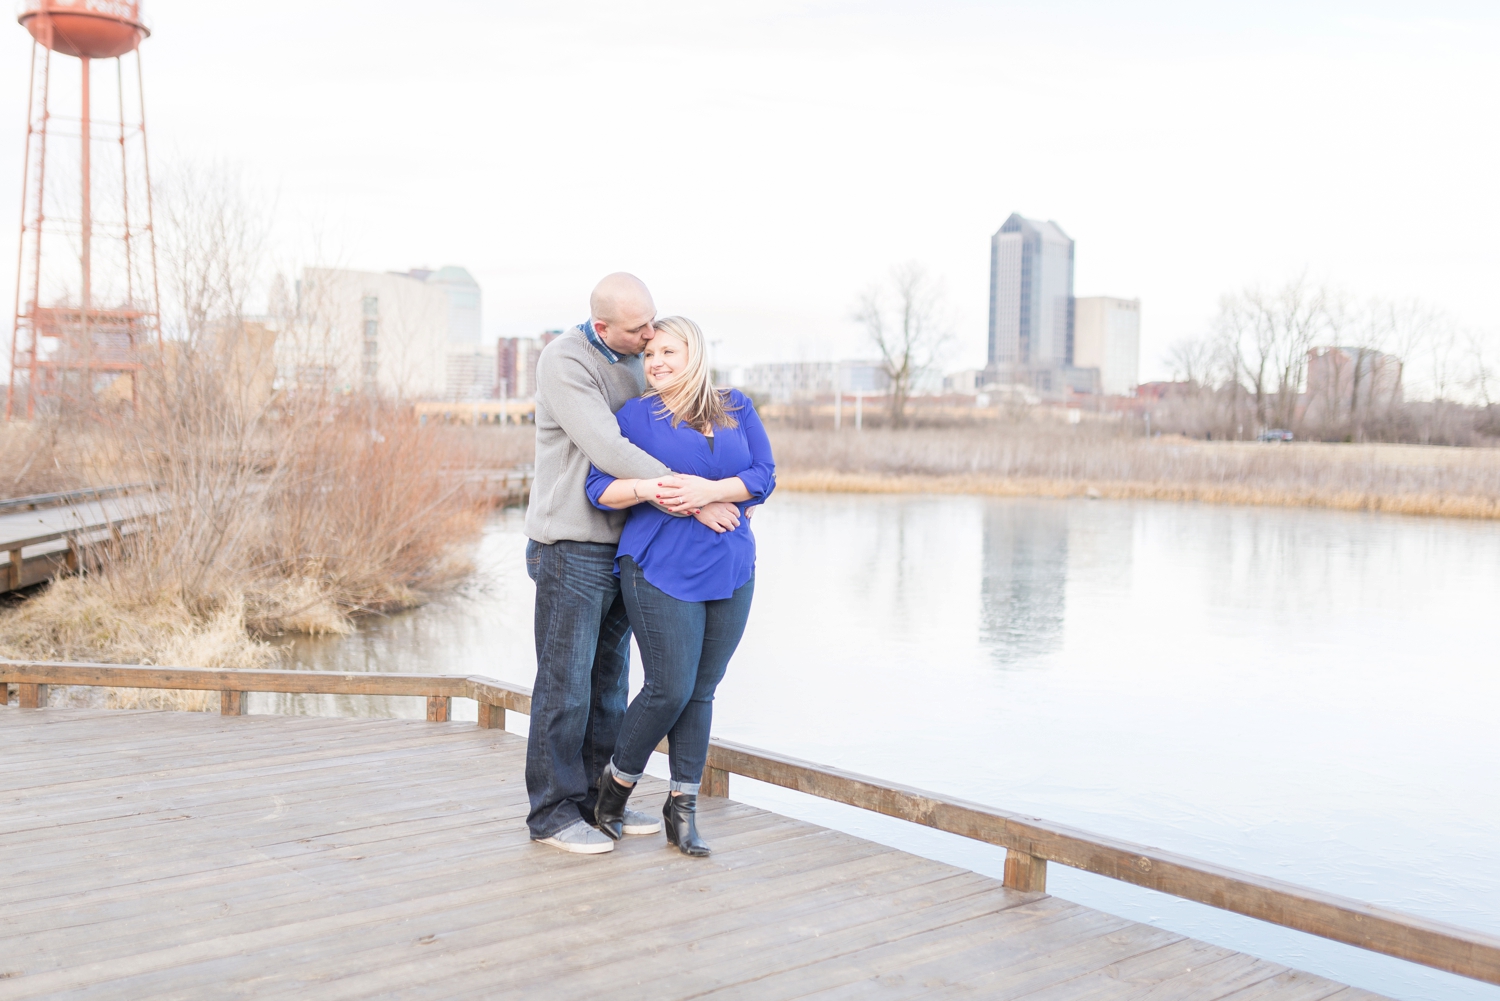 winter-engaged-couple-at-their-photo-session-at-the-scioto-audubon-park-near-grange-audubon-center-with-walkways-and-grass_0354